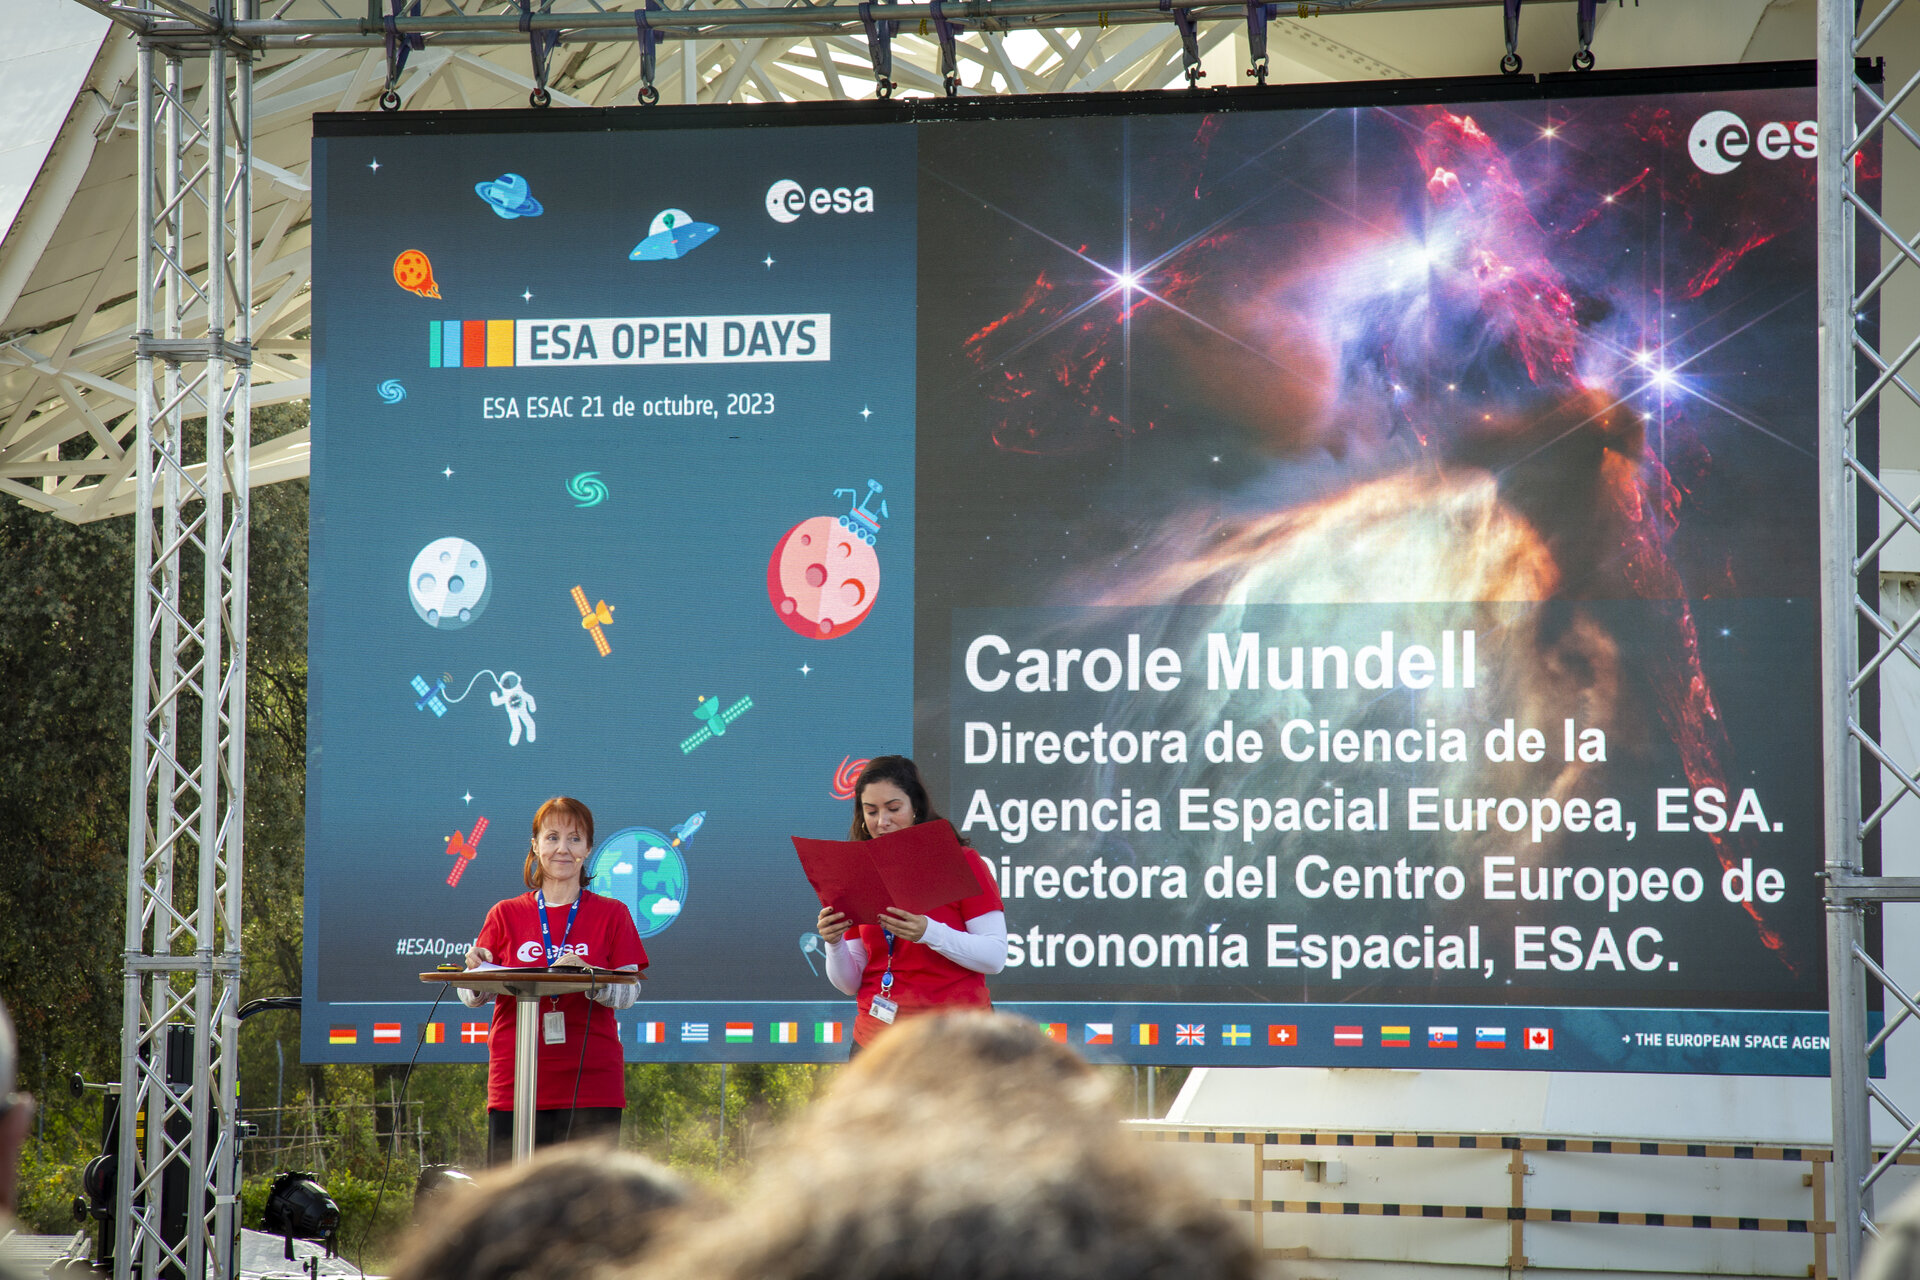 ESA Open Day 2023 at ESAC - Carole Mundell, ESA Director of Science and Head of ESAC